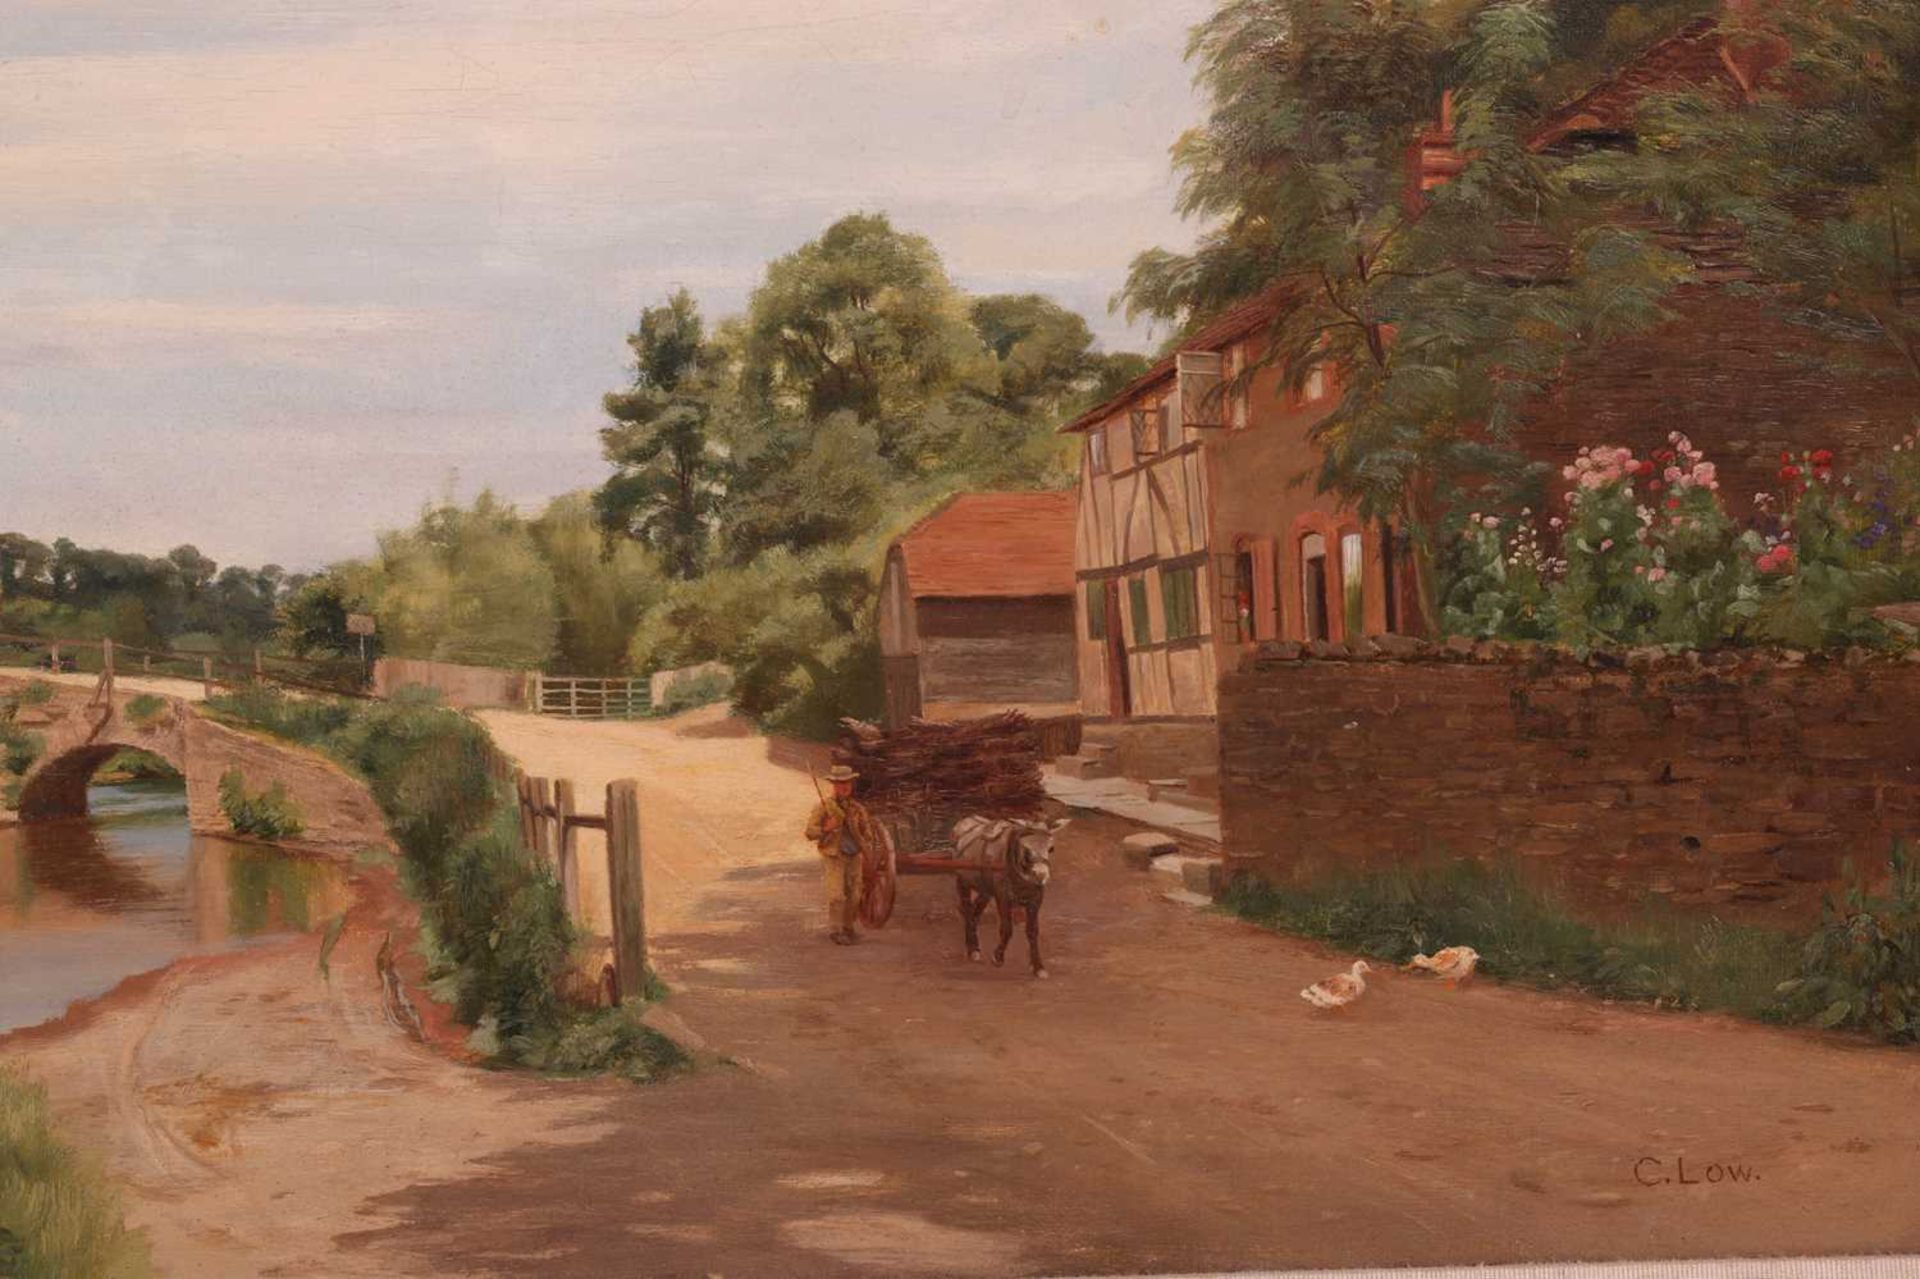 Charles Low (1840 - 1906), The Village Ford, Eashing, Surrey, signed, oil on canvas, 32.5 x 49 cm, f - Bild 3 aus 8